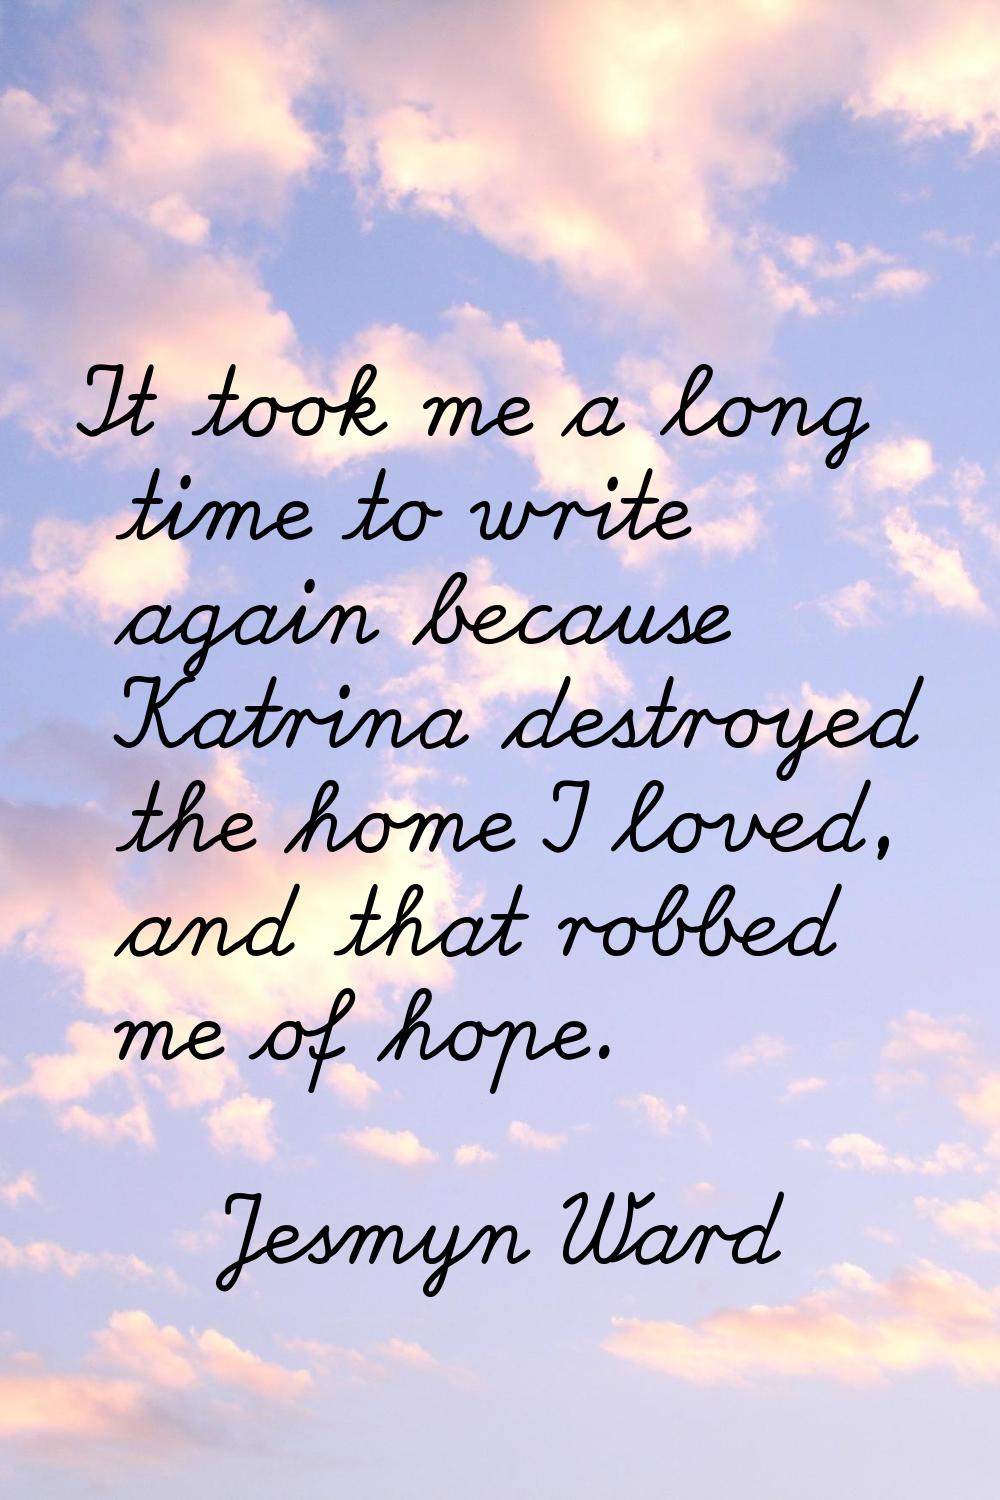 It took me a long time to write again because Katrina destroyed the home I loved, and that robbed m